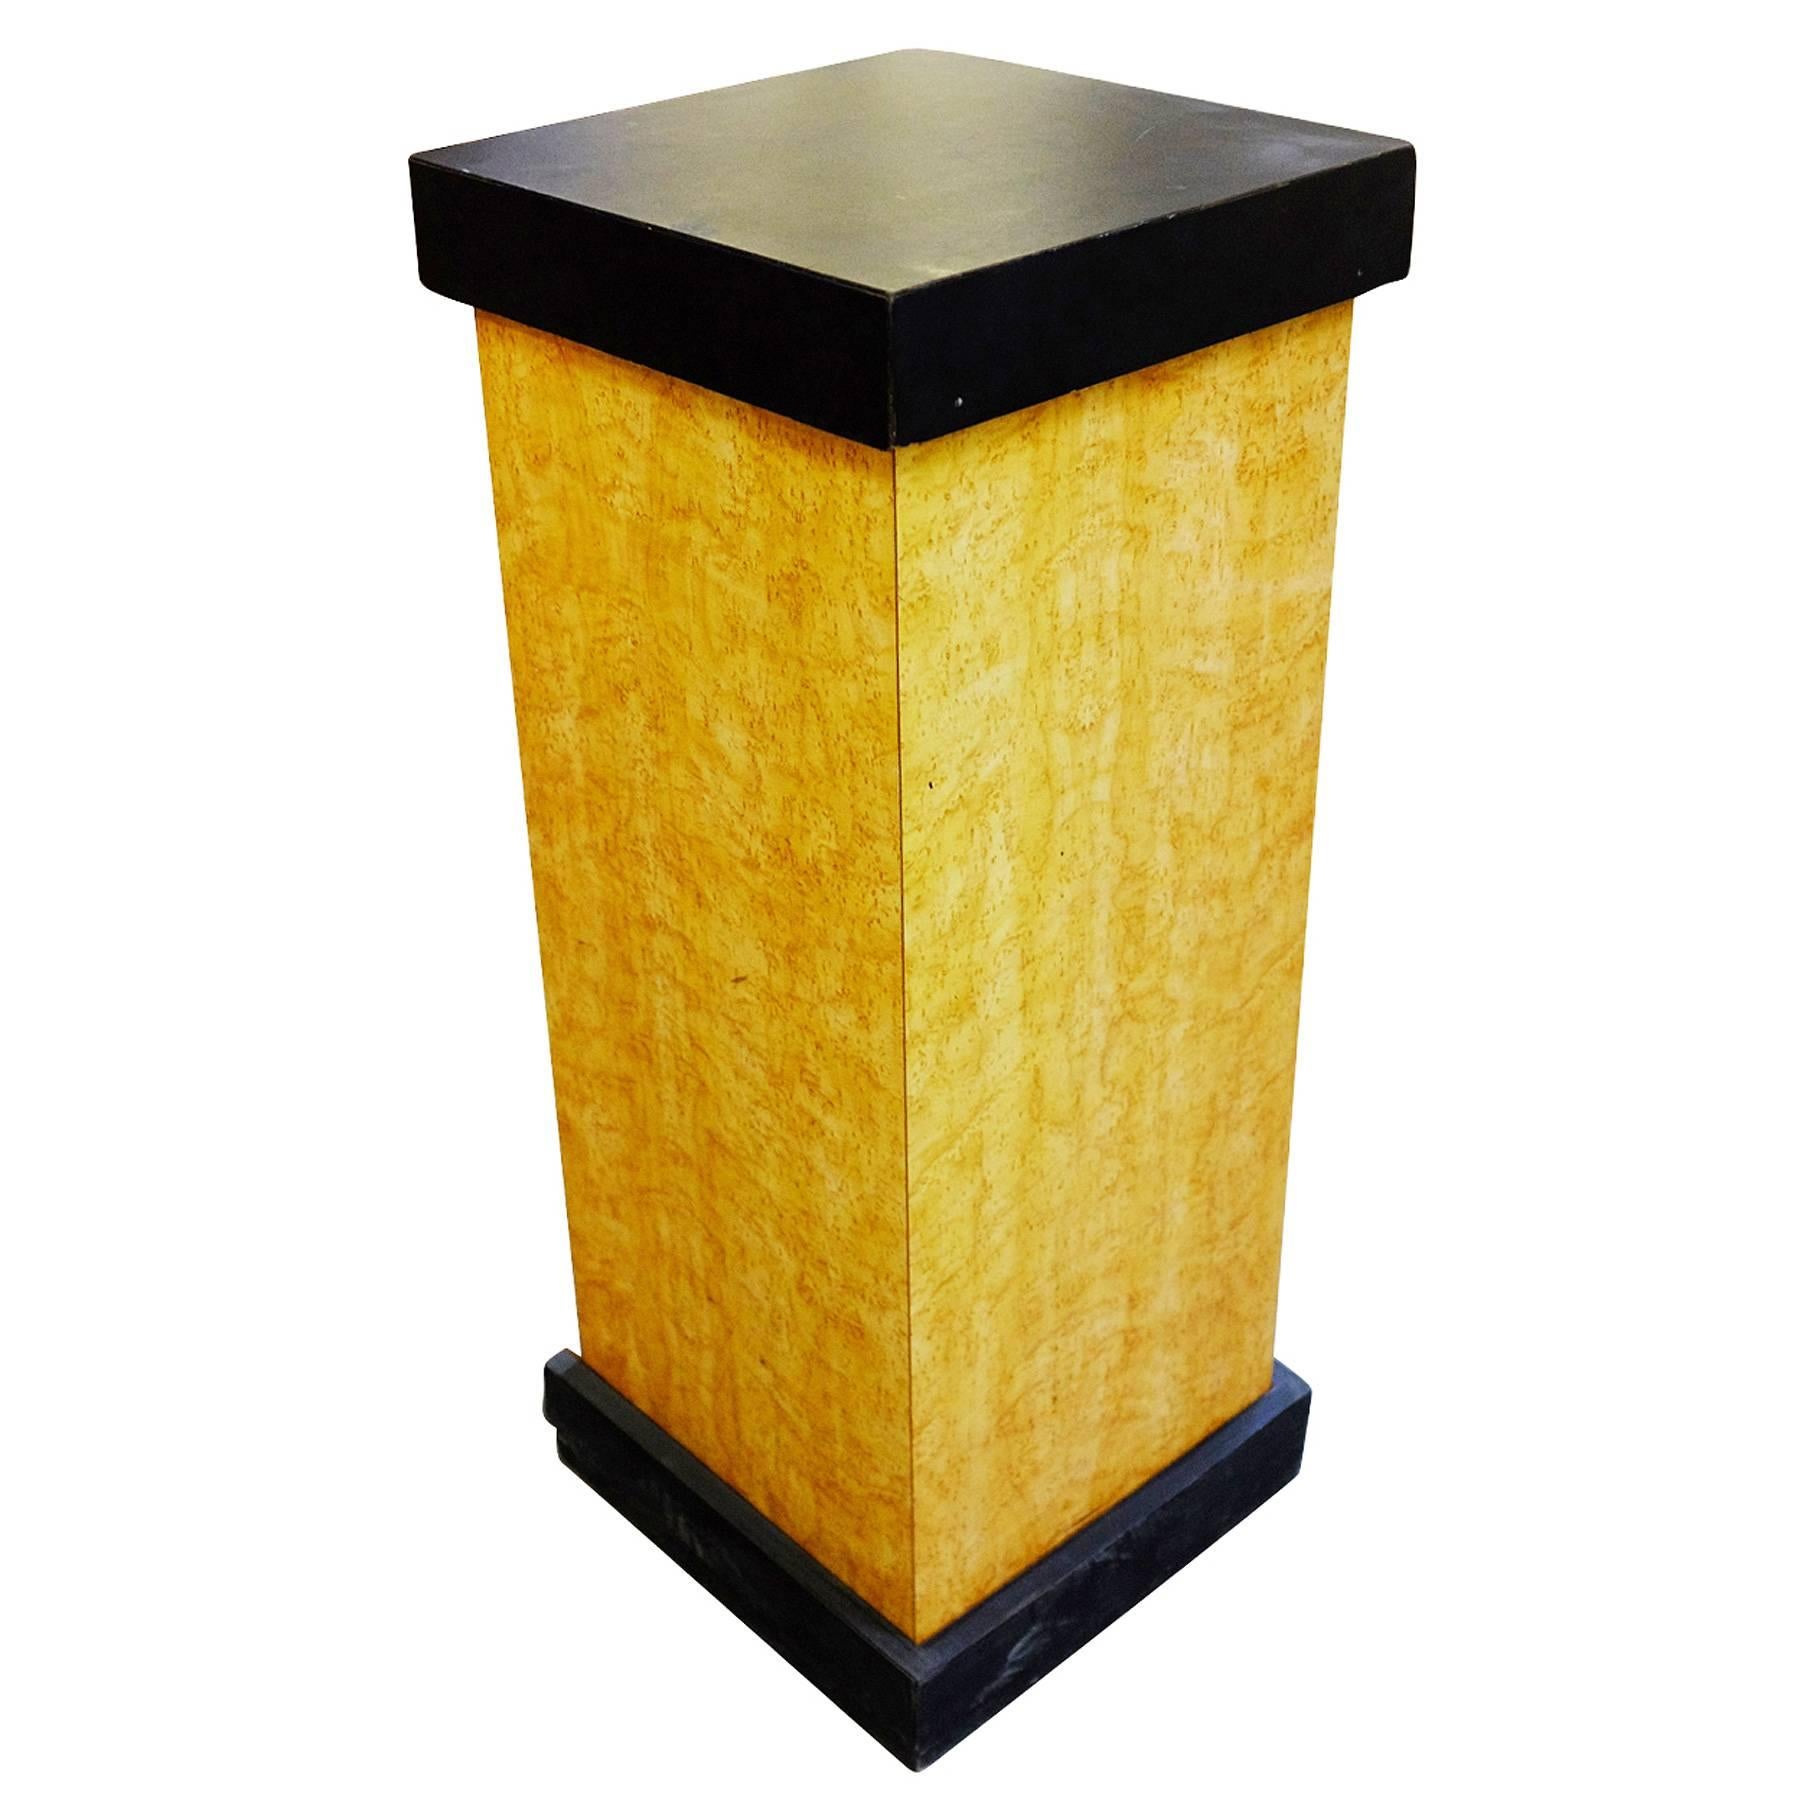 Modernist Art Deco bird's-eye maple Formica pedestal with black painted top.